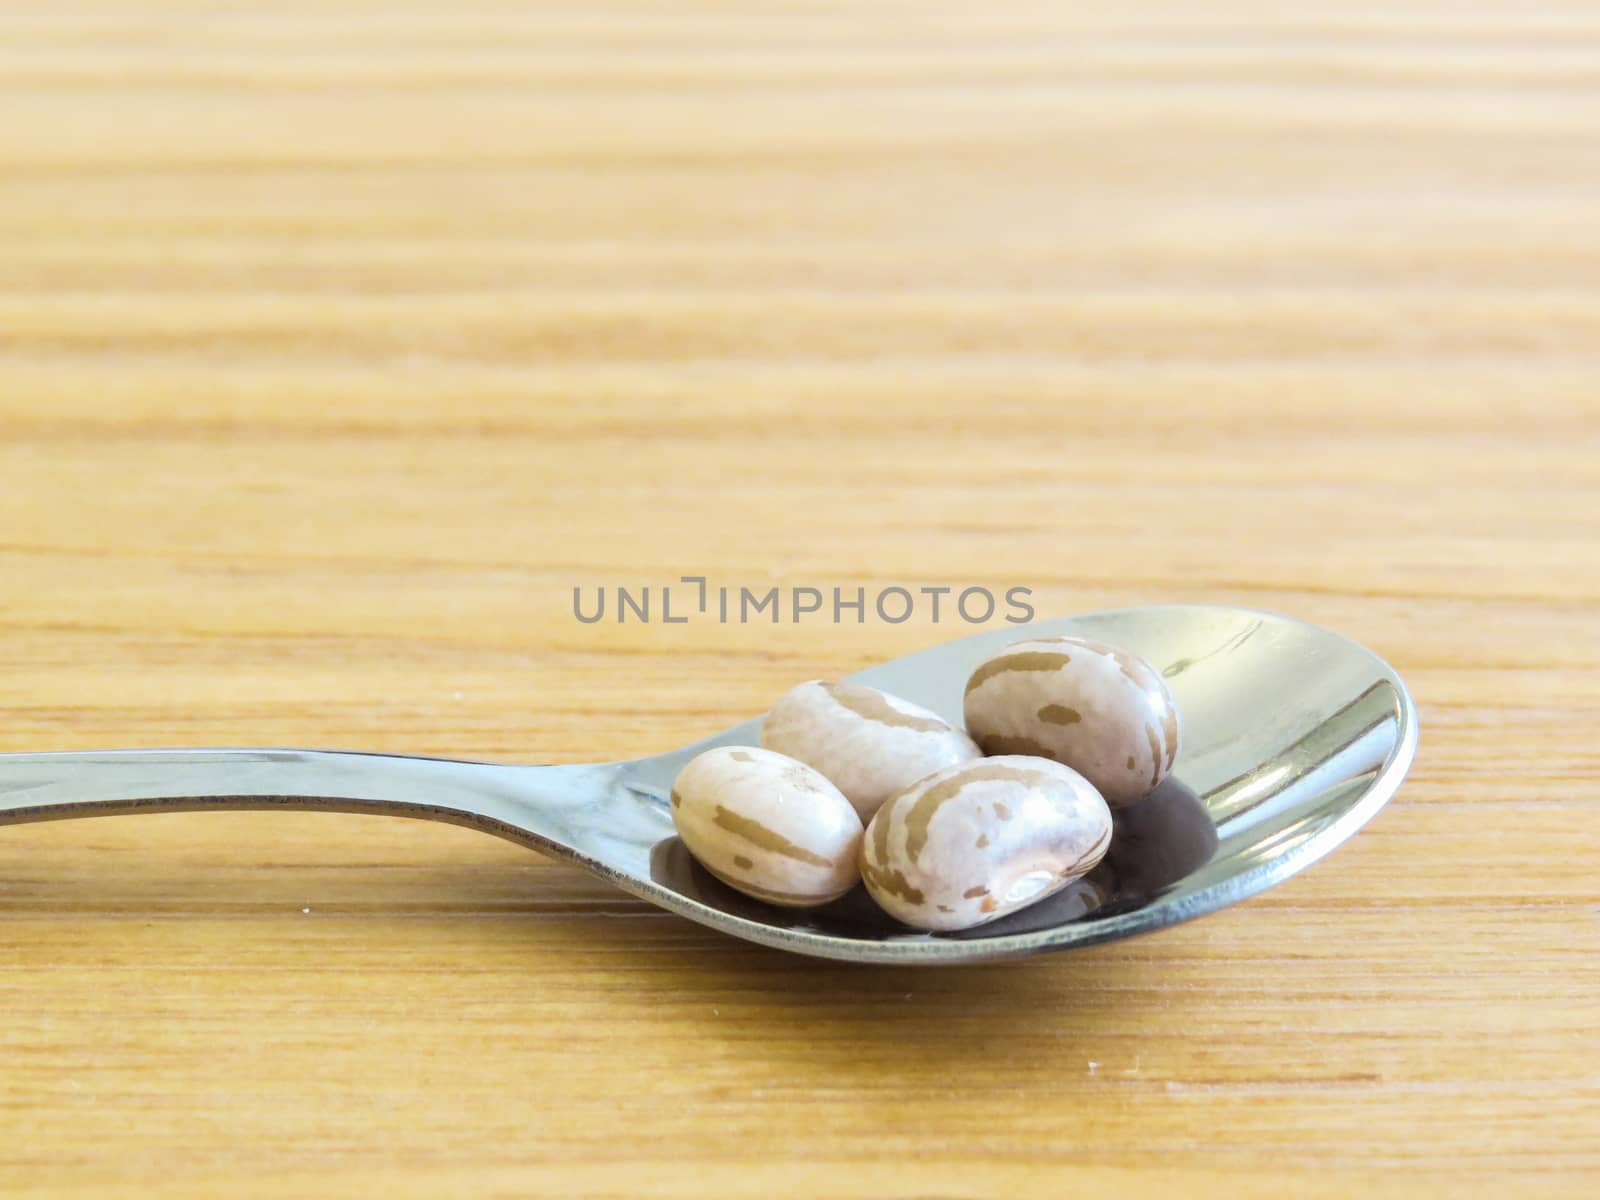 Closeup of polished steel spoon with carioca beans on wooden board.